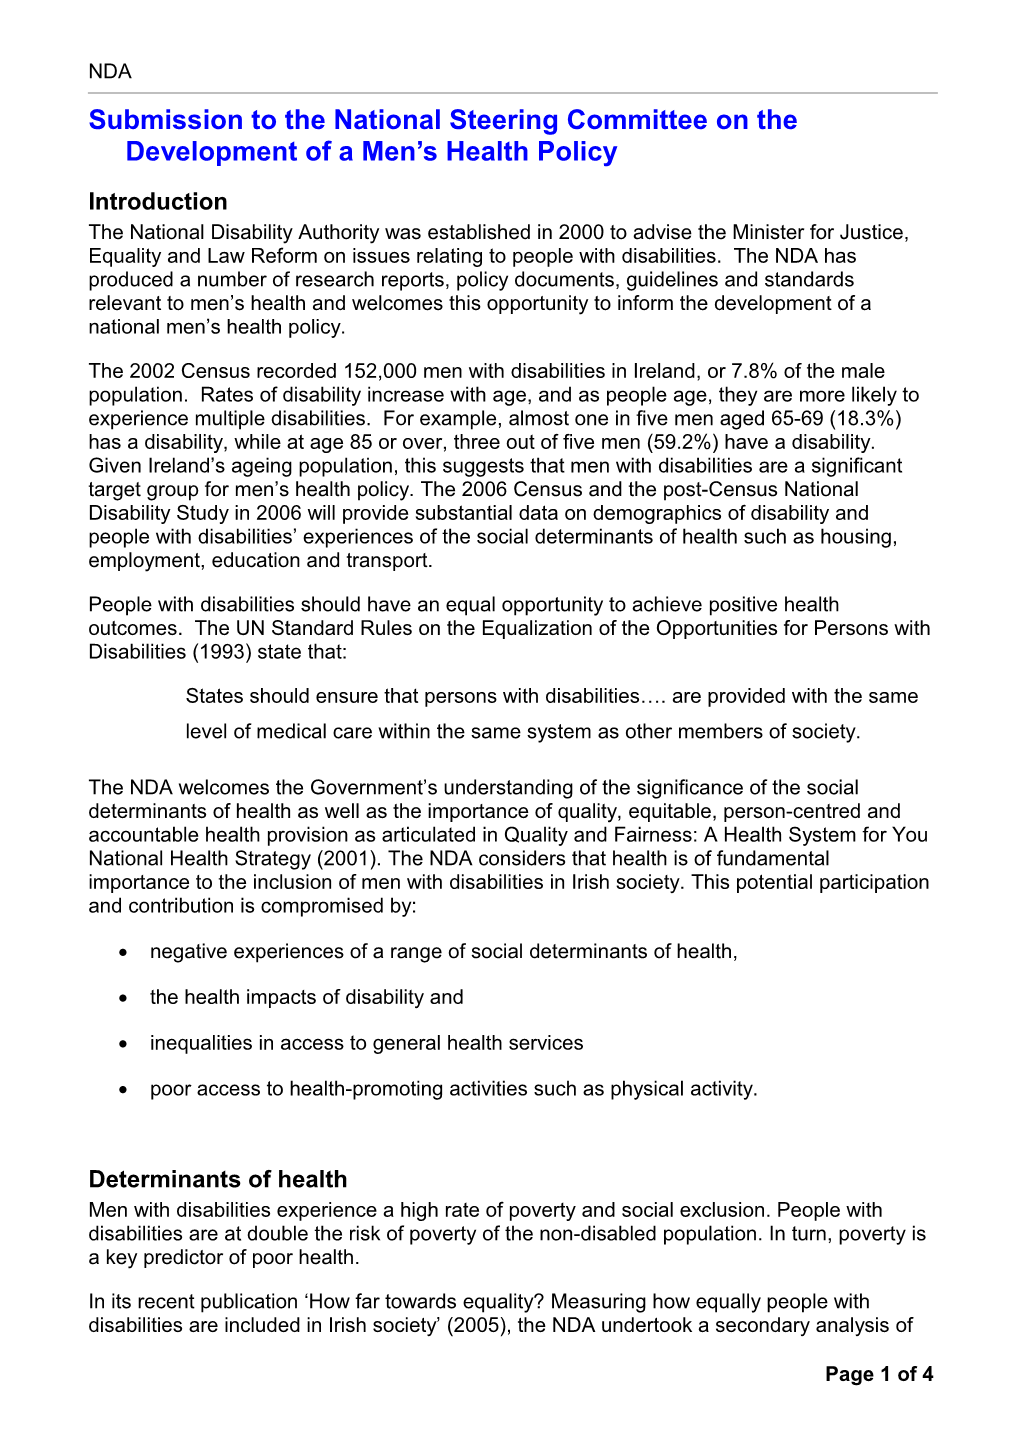 Submission to the National Steering Committee on the Development of a Men S Health Policy